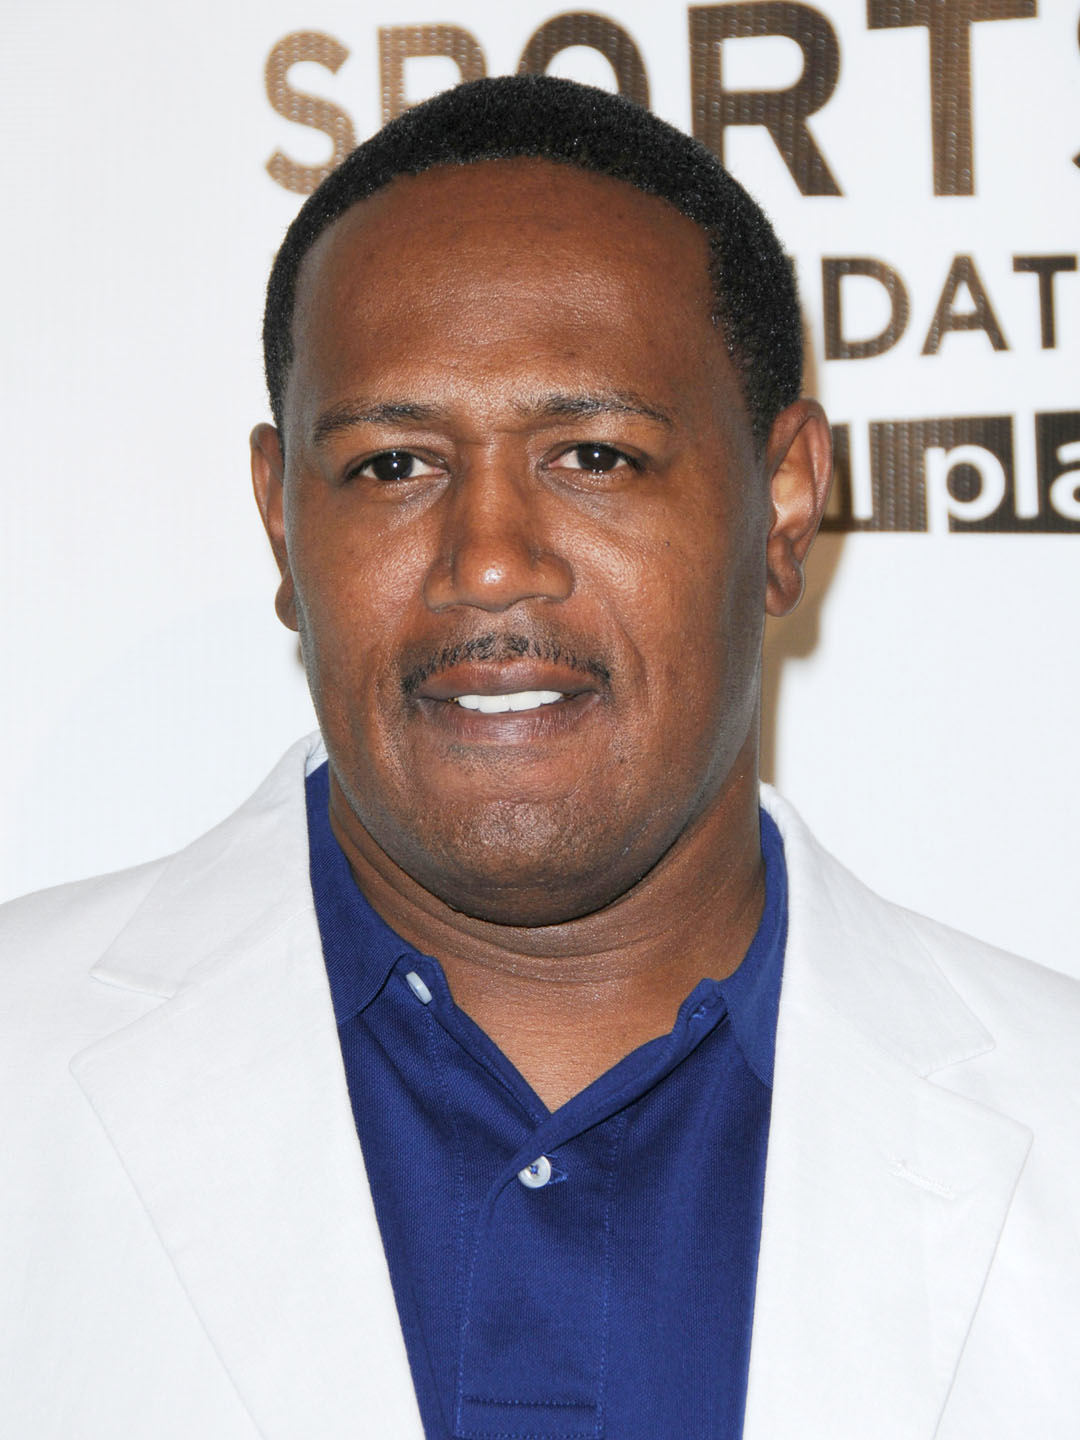 How tall is Master P?